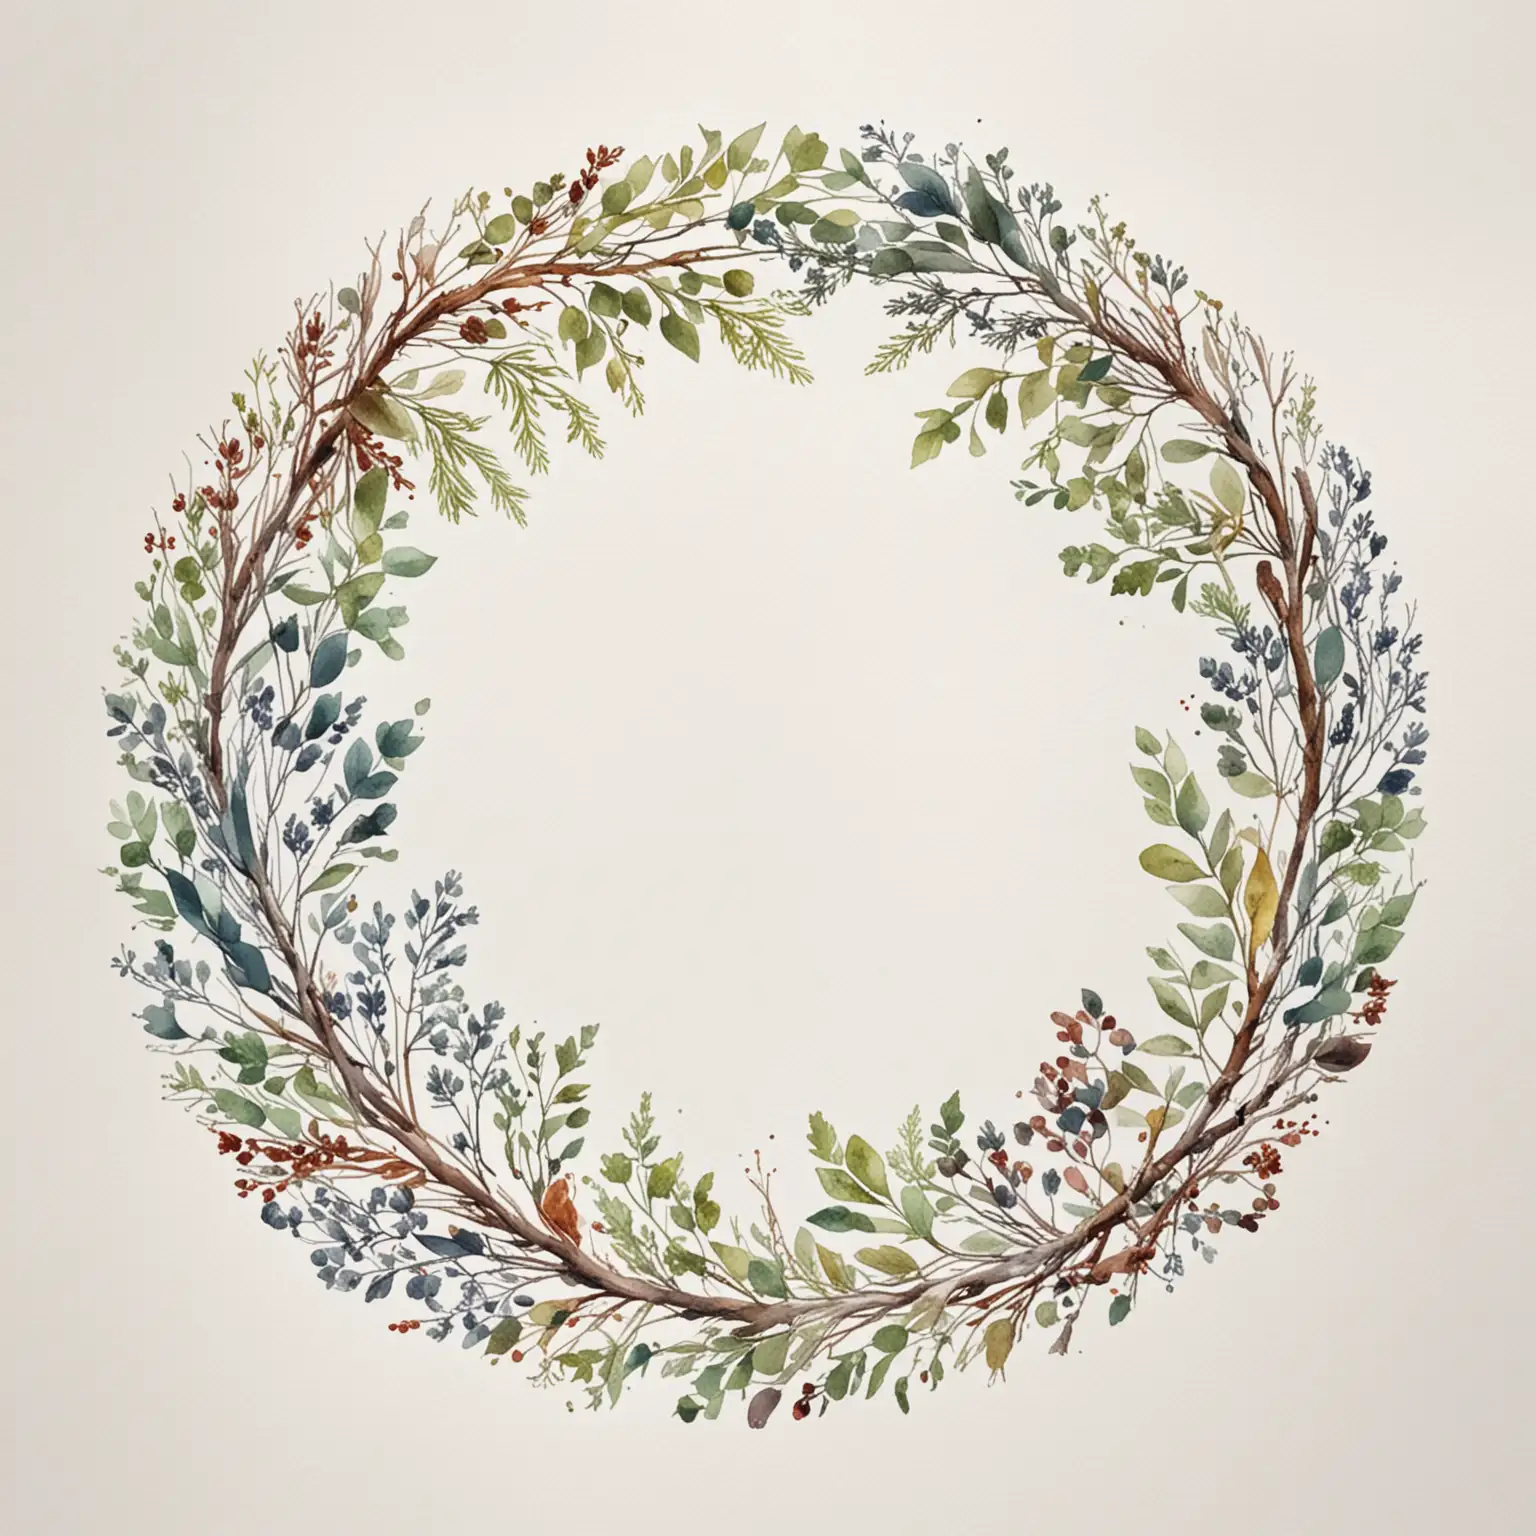 Watercolor Circle of Twigs on White Background